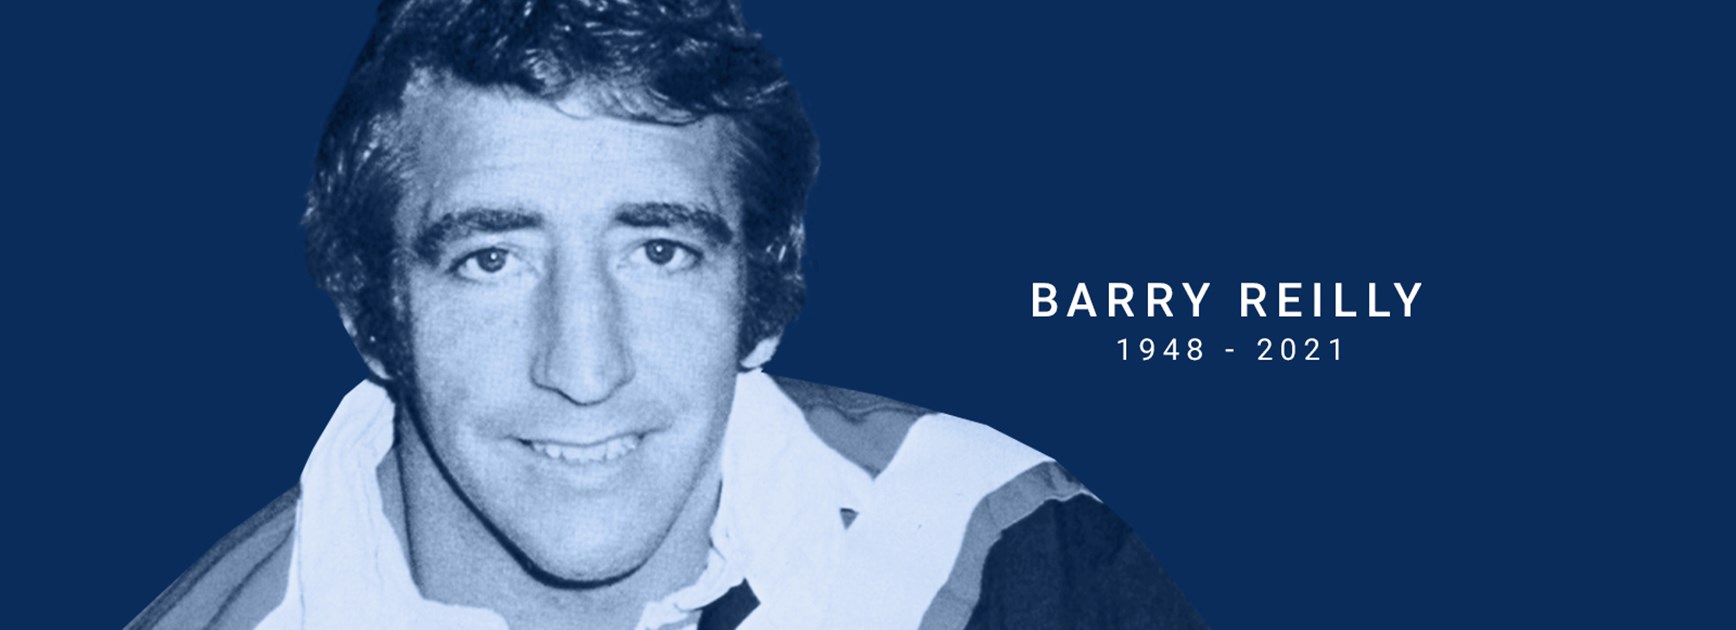 Vale Barry Reilly